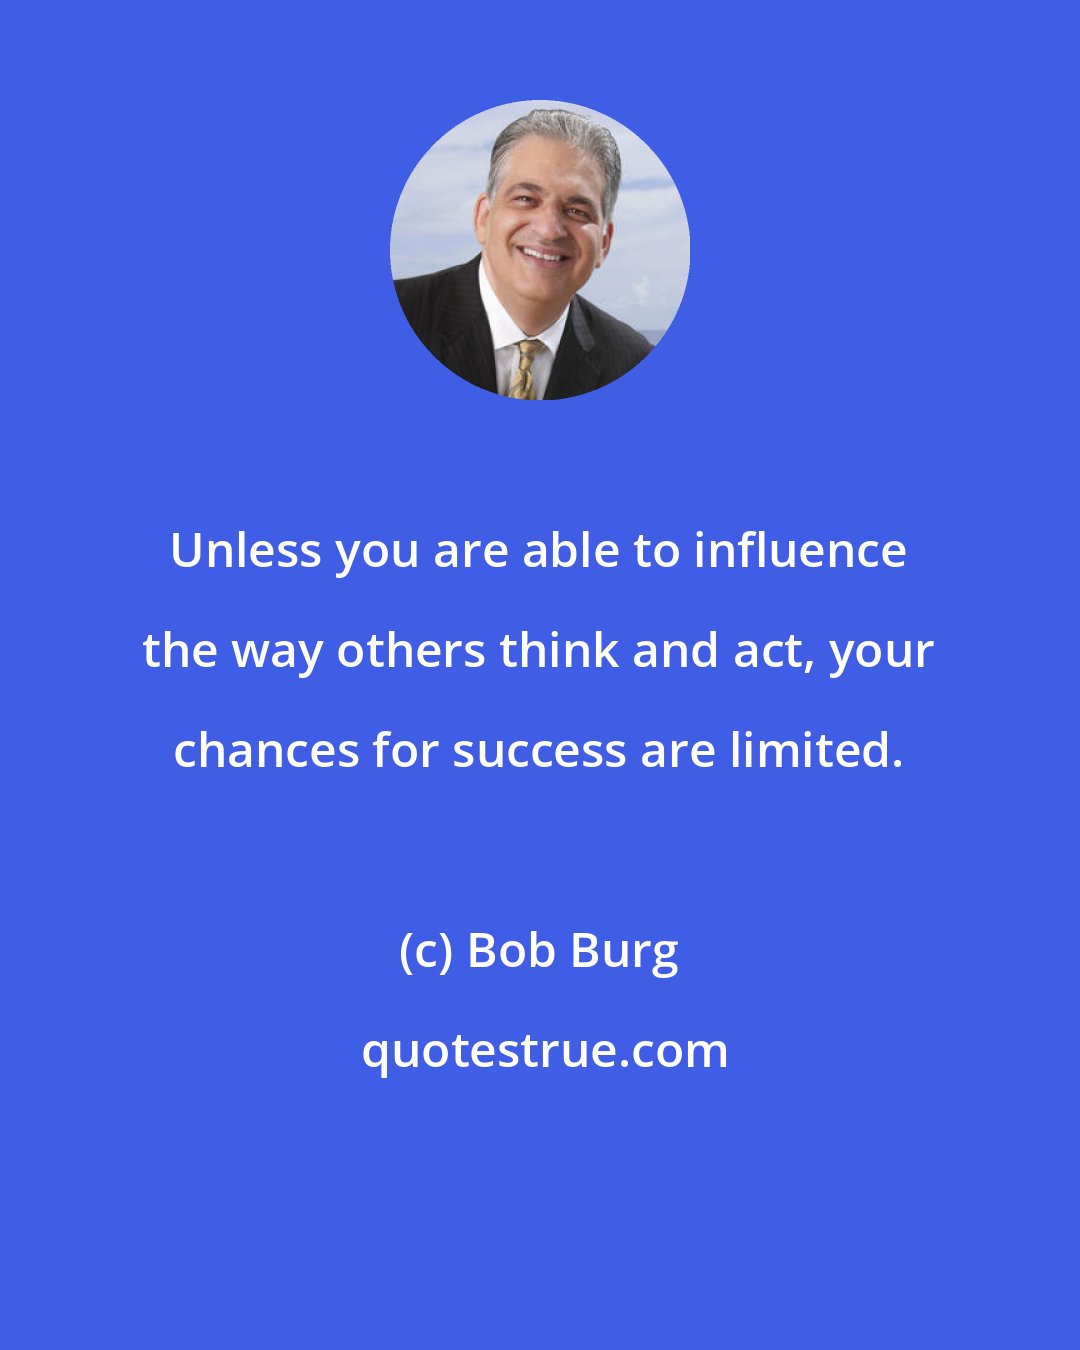 Bob Burg: Unless you are able to influence the way others think and act, your chances for success are limited.